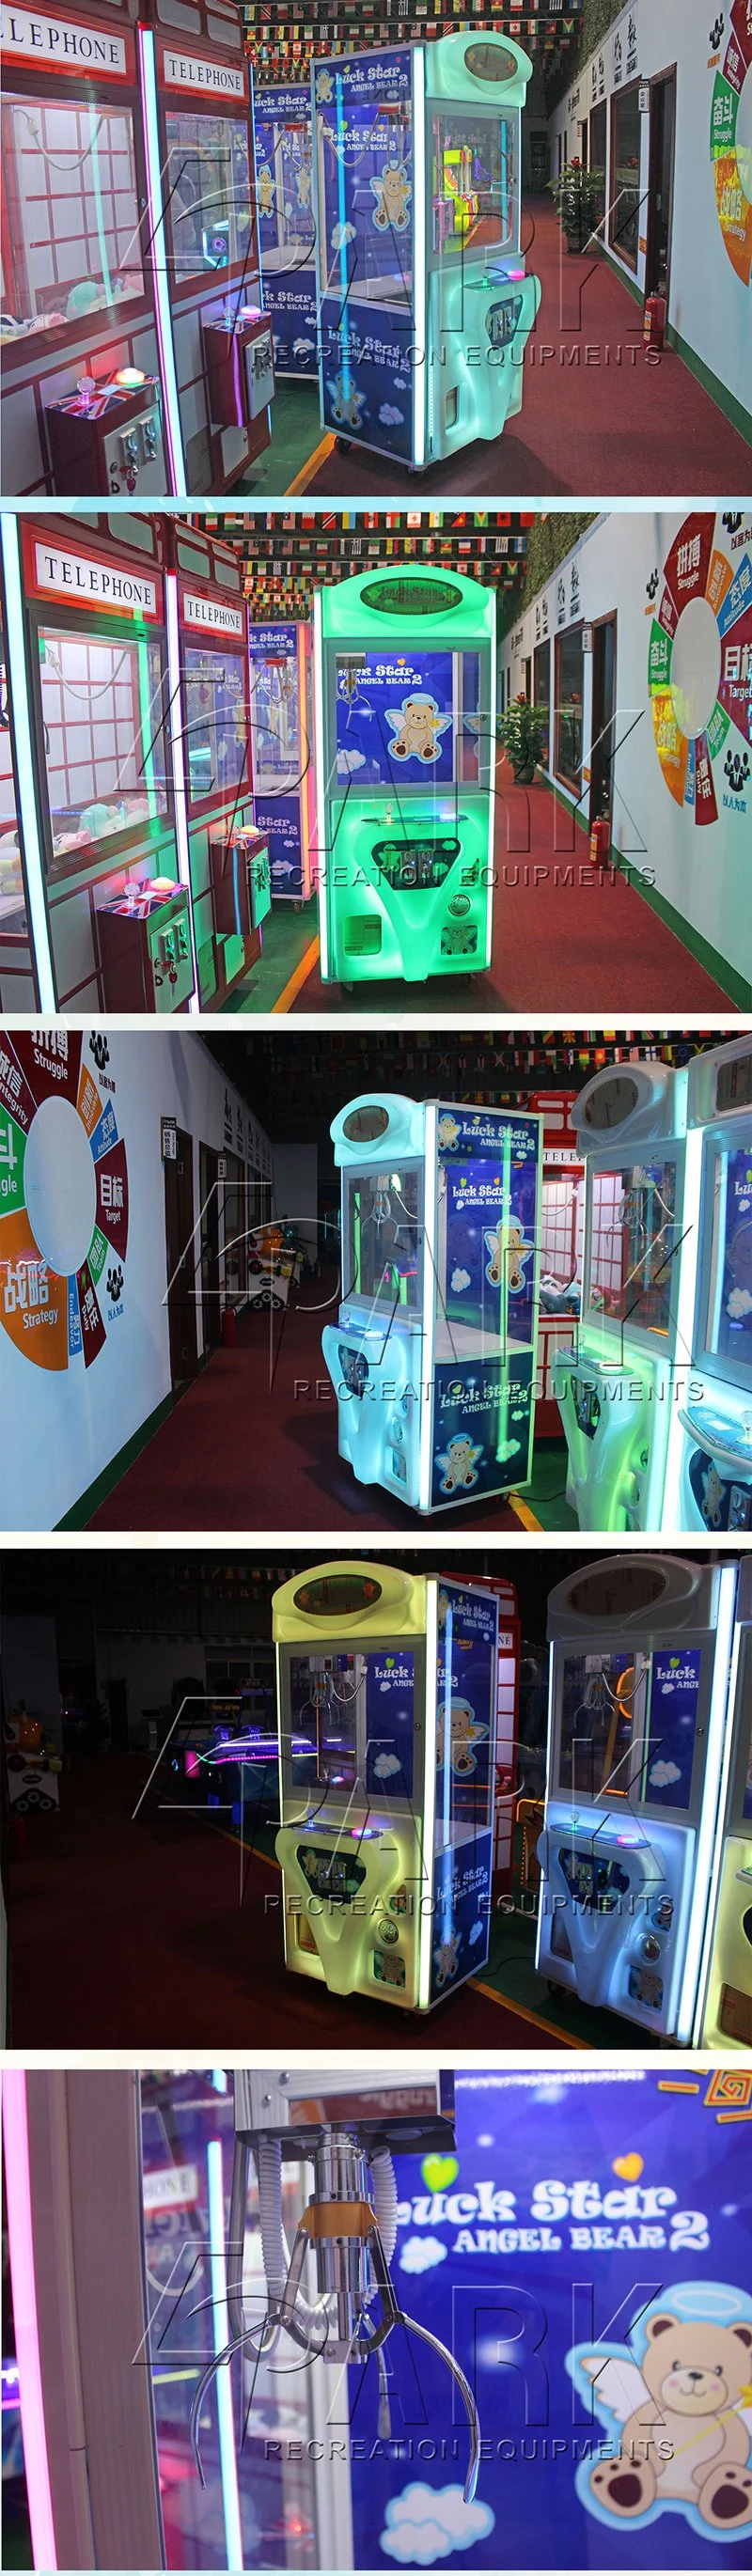 Luck Star 2 Gift Toy Grabber Claw Crane Vending Game Machine